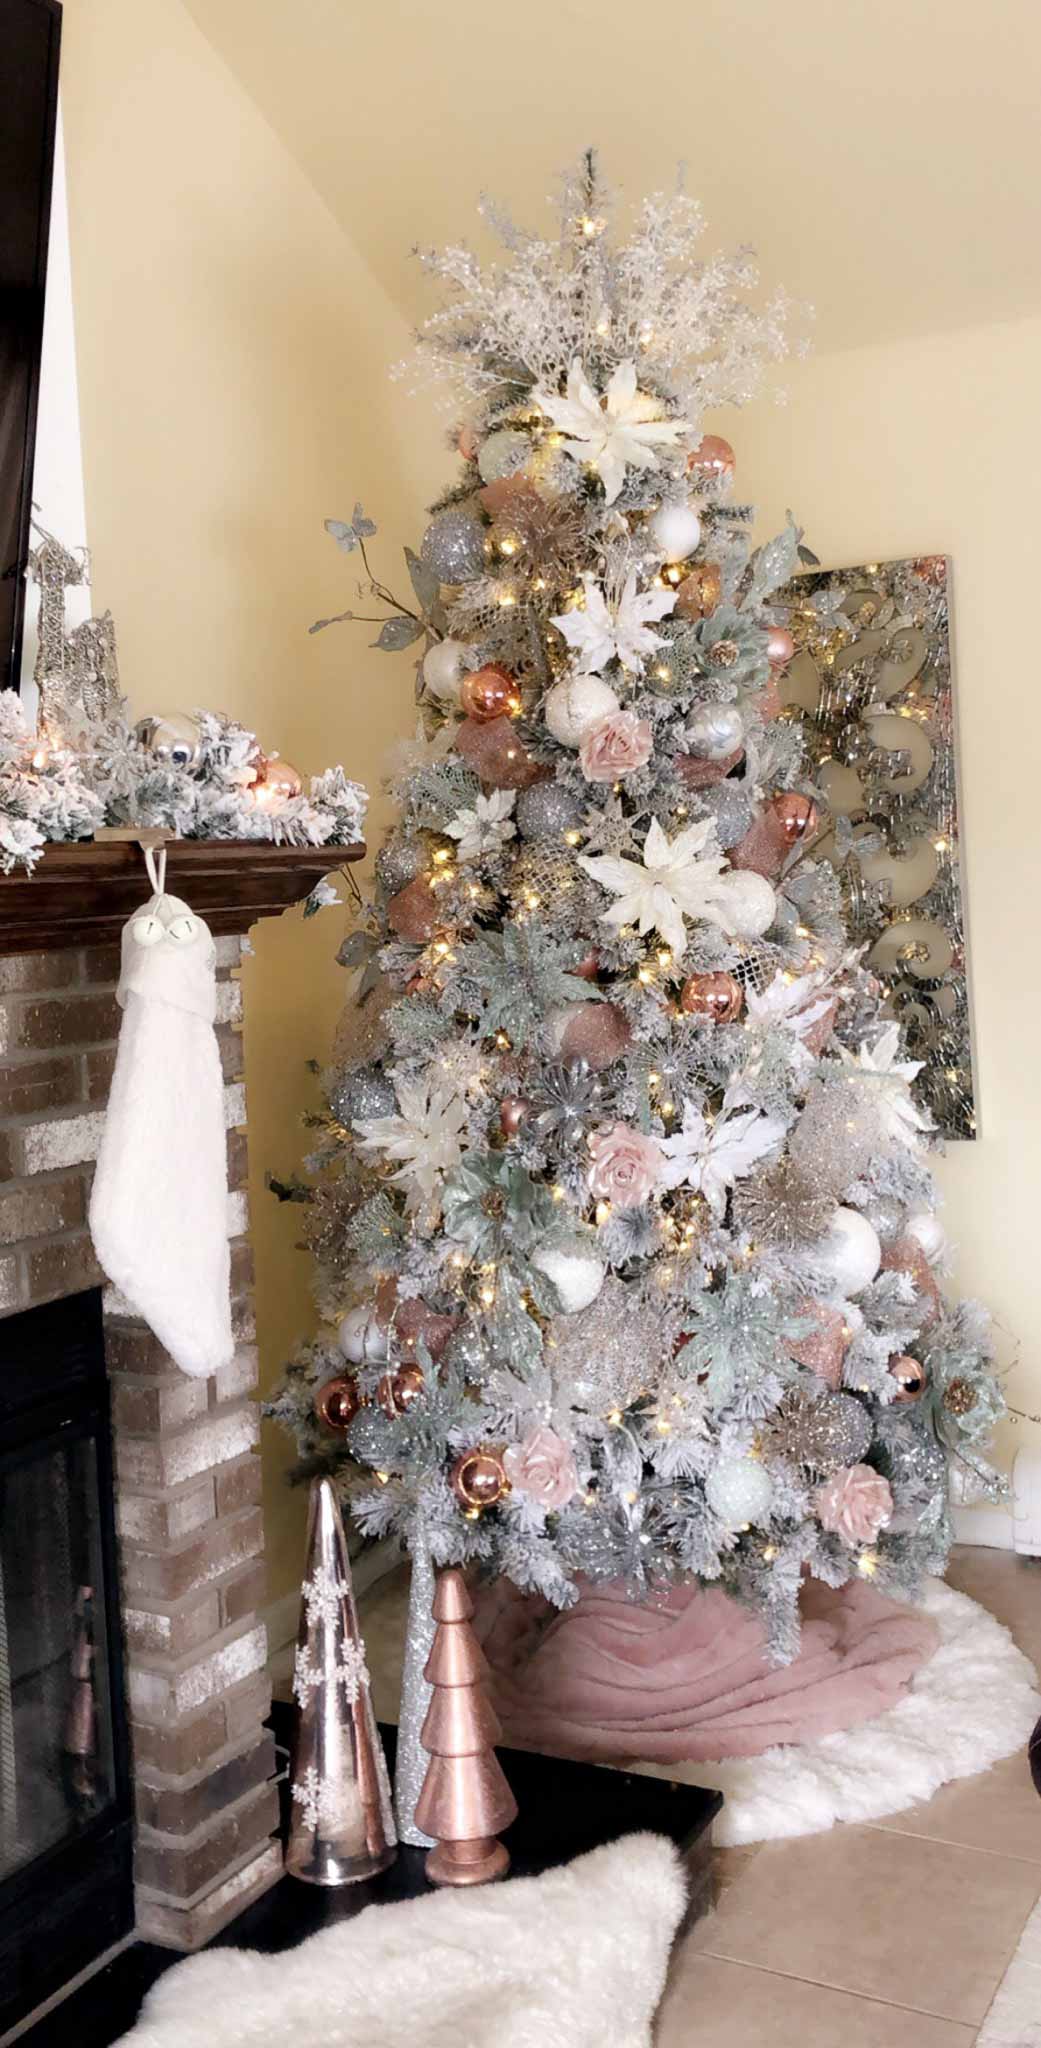 50 Christmas Tree Ideas with Different Themes and Colors